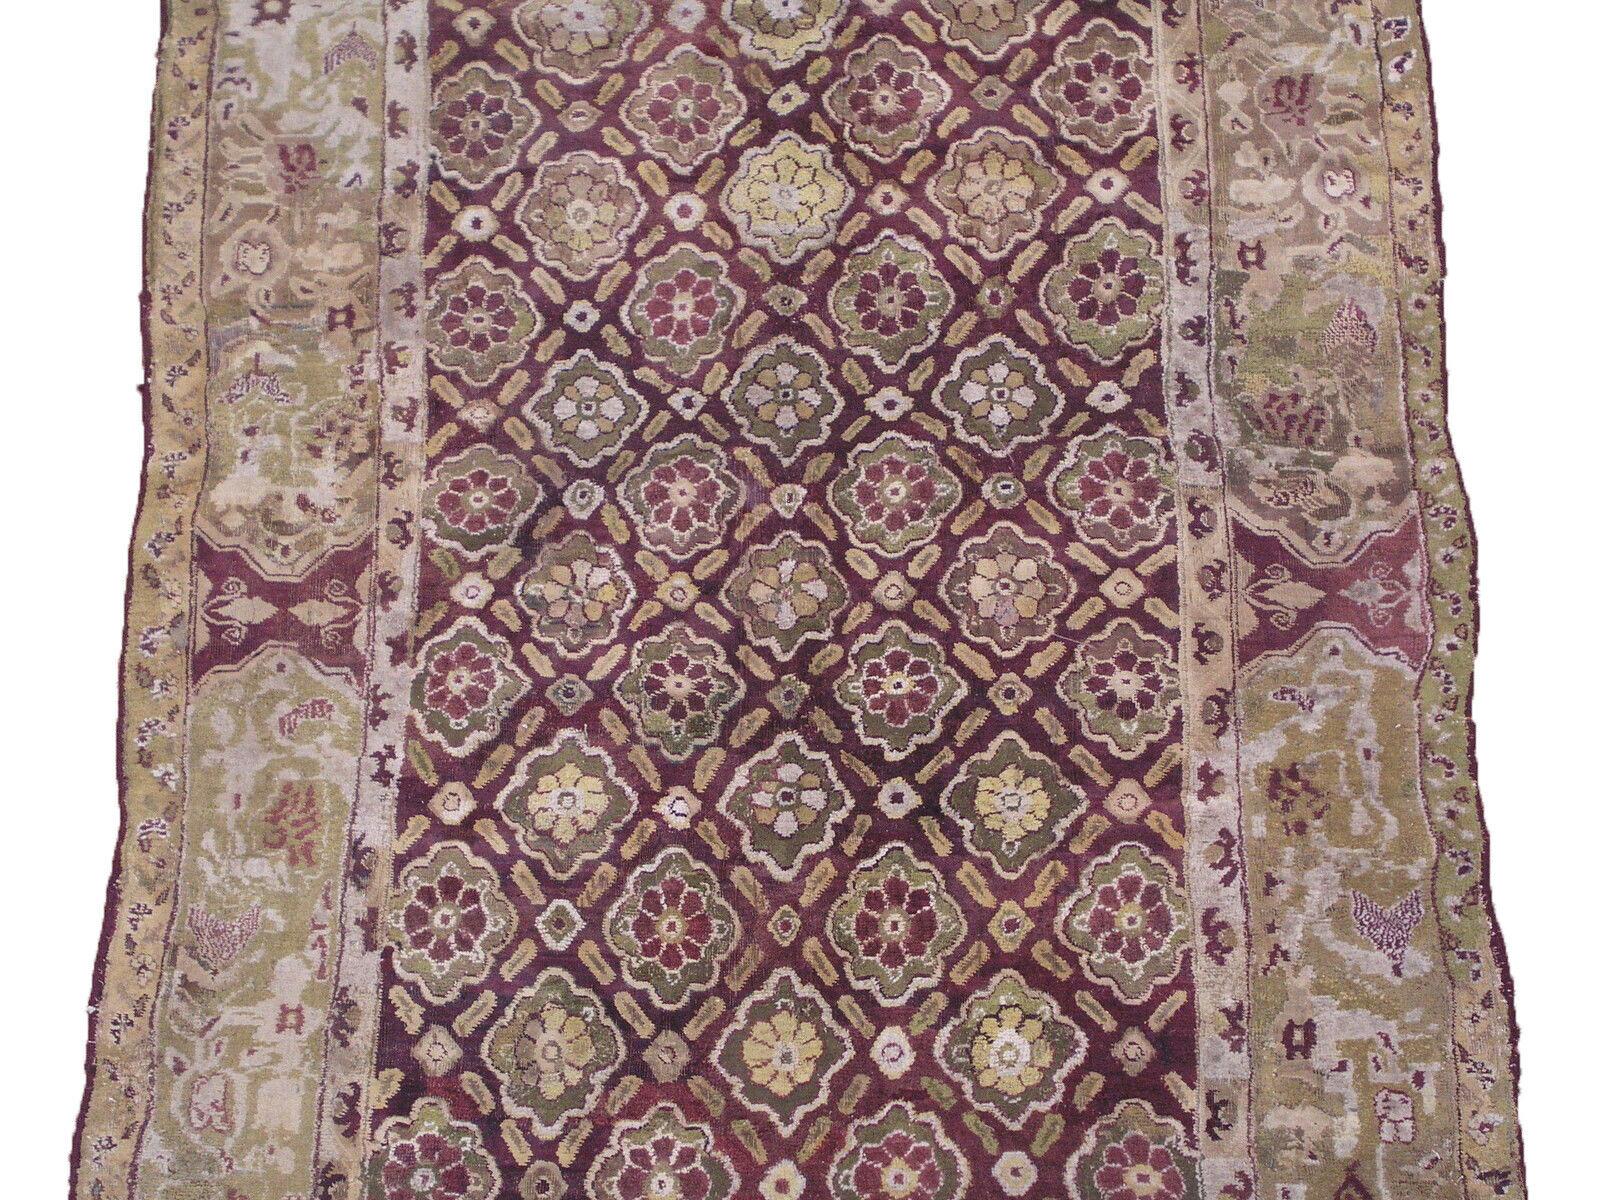 Hand-knotted wool pile on a cotton foundation.

Circa 1880

Dimensions: 4'4